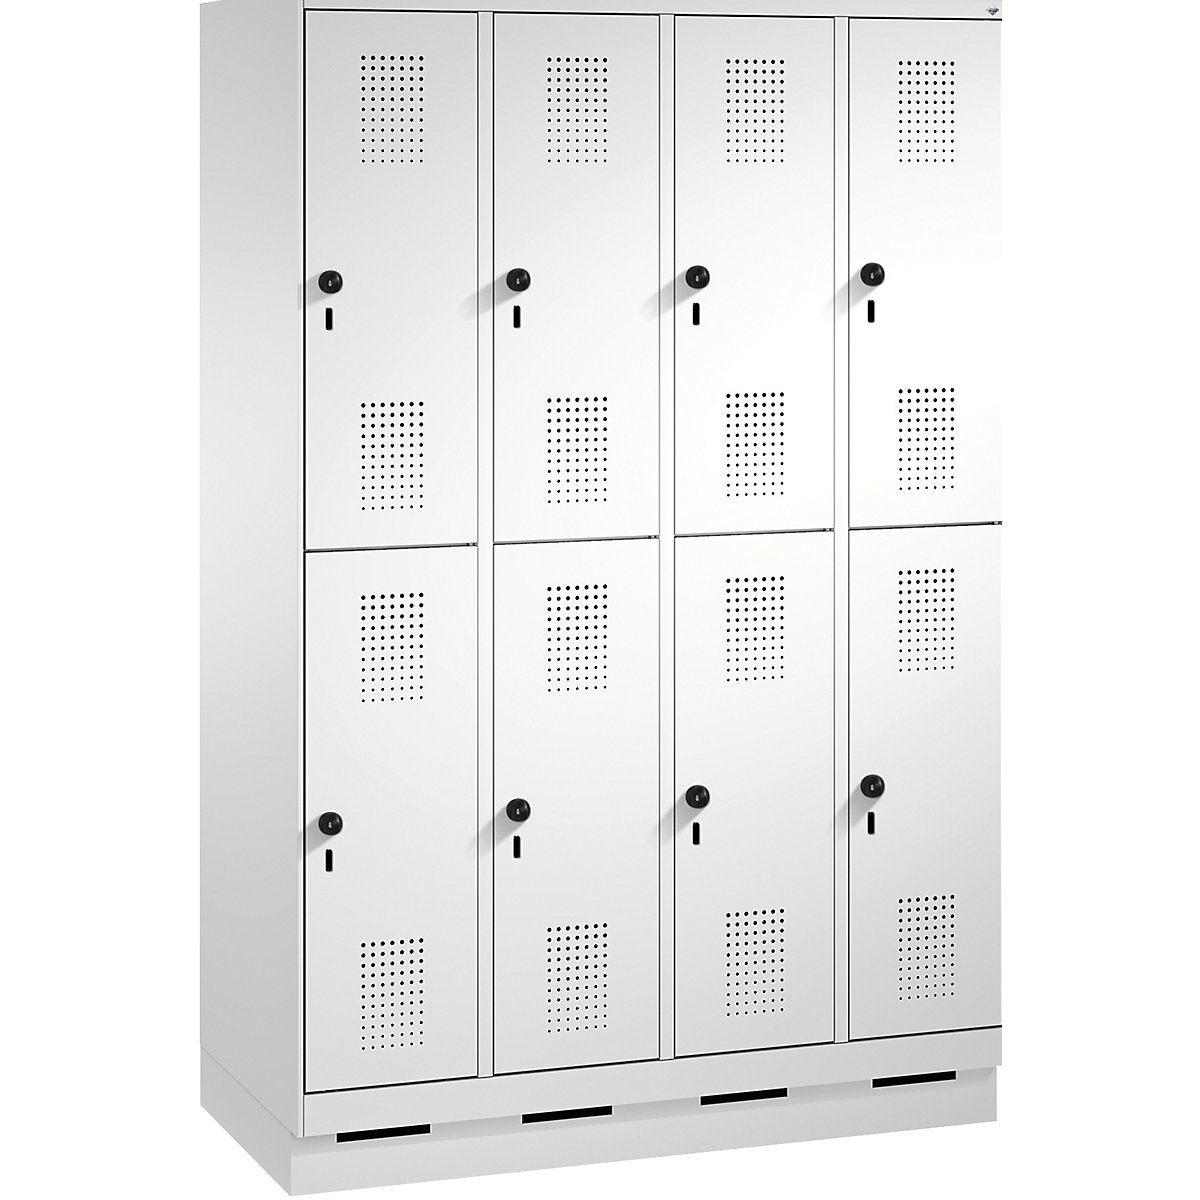 EVOLO cloakroom locker, double tier, with plinth – C+P, 4 compartments, 2 shelf compartments each, compartment width 300 mm, light grey-16